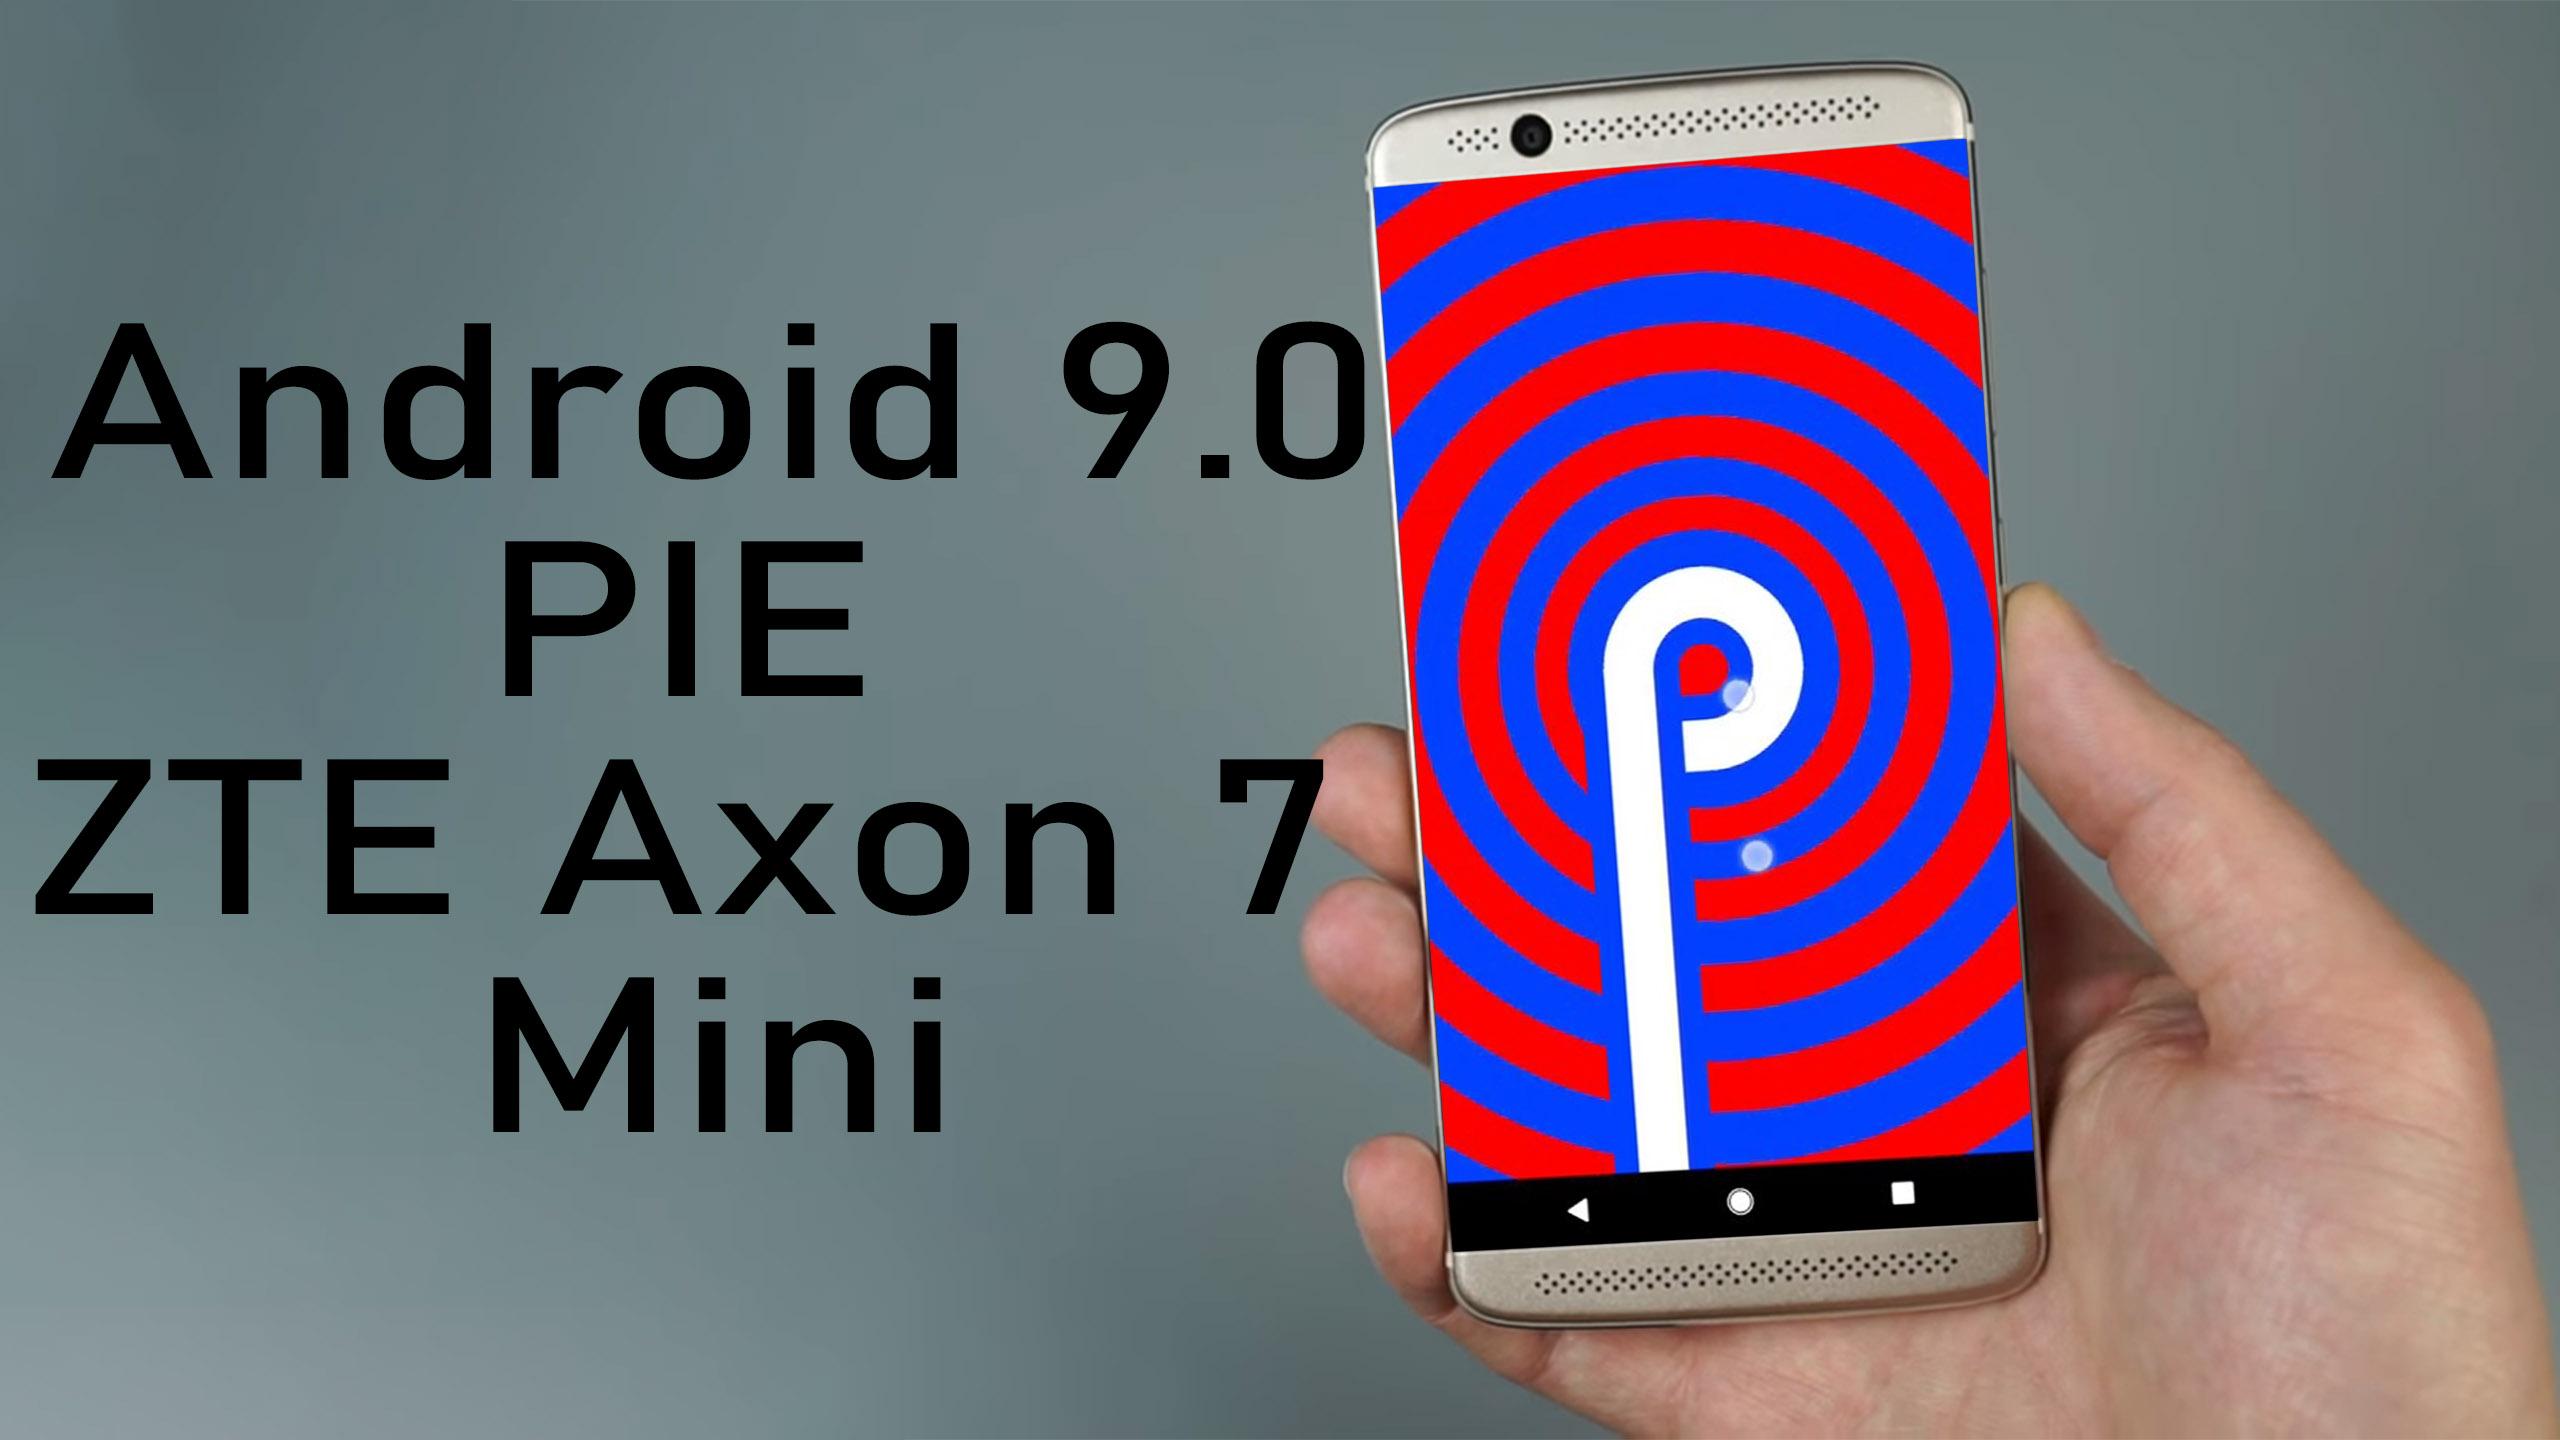 Install Android 9 0 Pie On Zte Axon 7 Mini Lineageos 16 How To Guide The Upgrade Guide